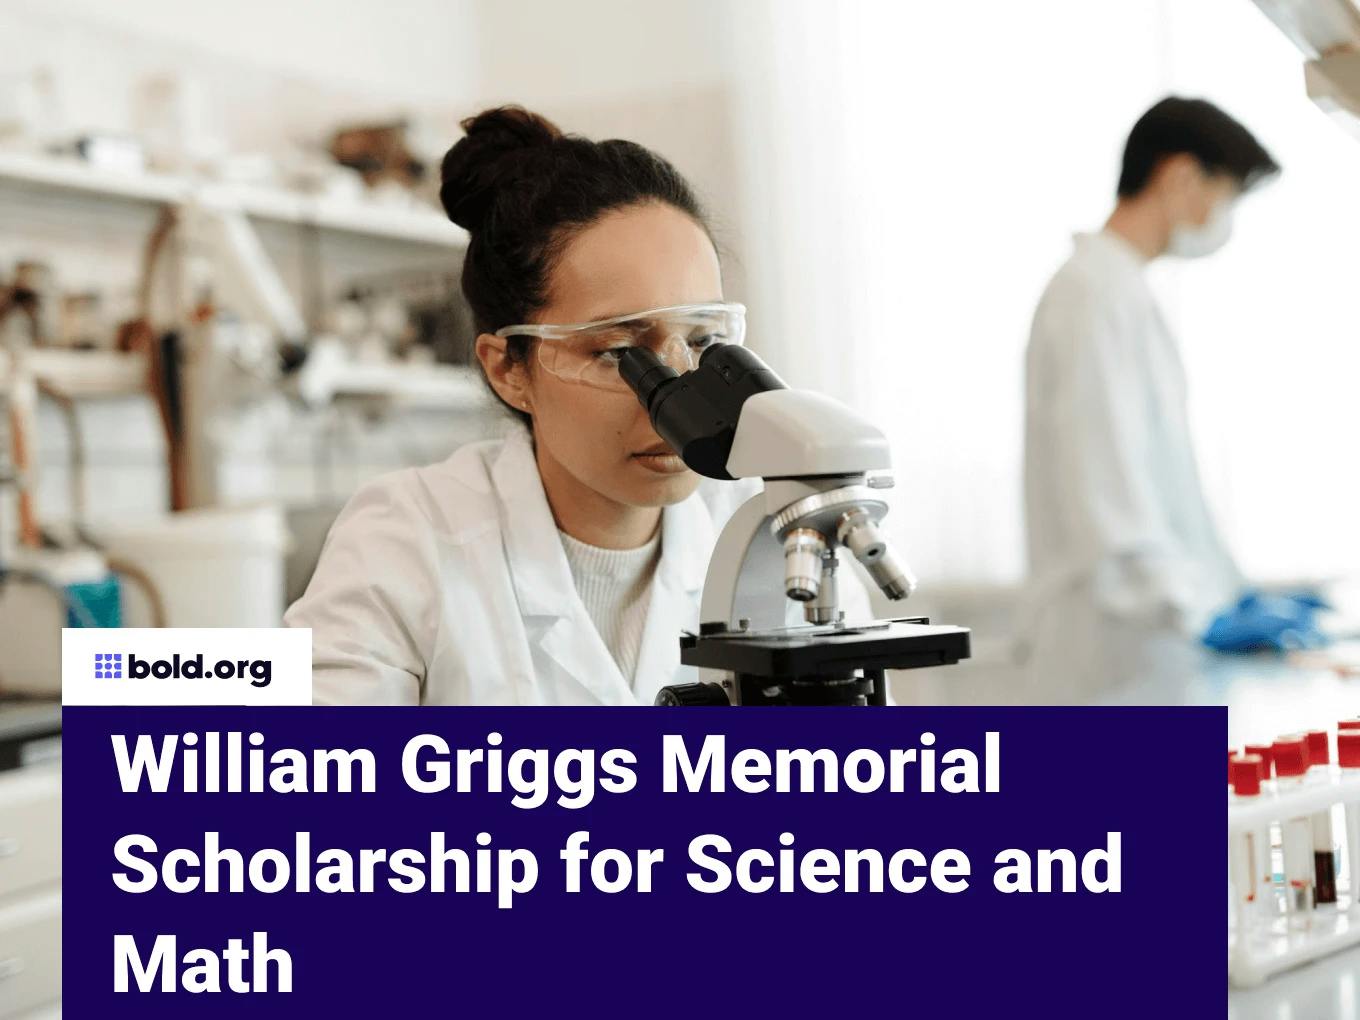 William Griggs Memorial Scholarship for Science and Math